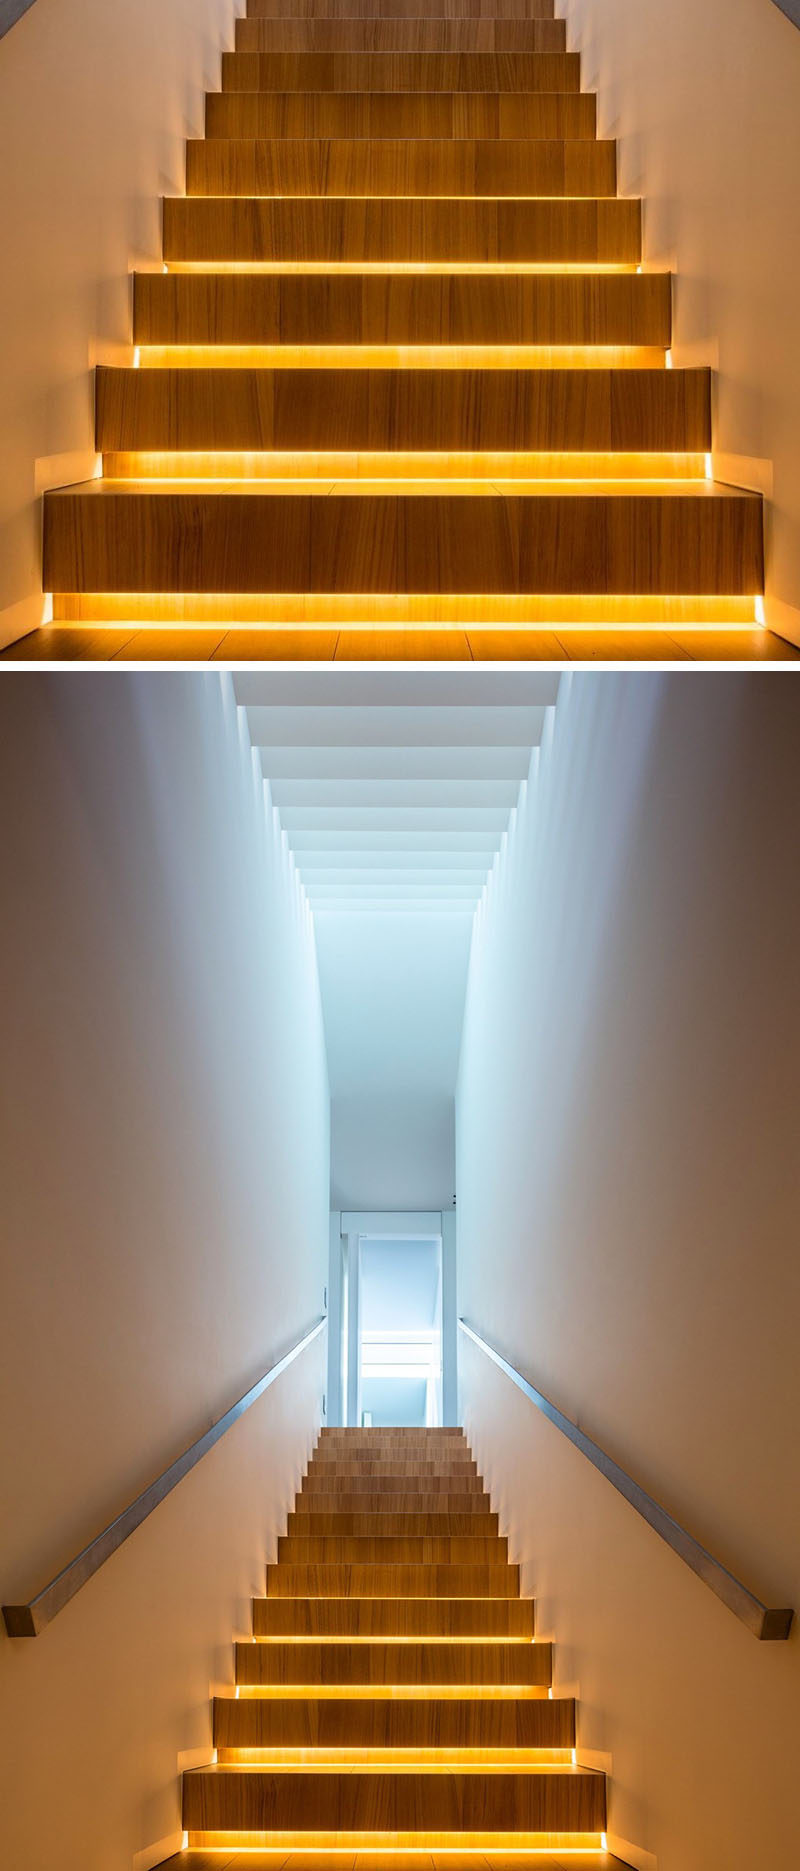 18 Examples Of Stair Details To Inspire You // These wooden stairs with hidden lighting, light up from underneath to ensure you'll never miss a step again.